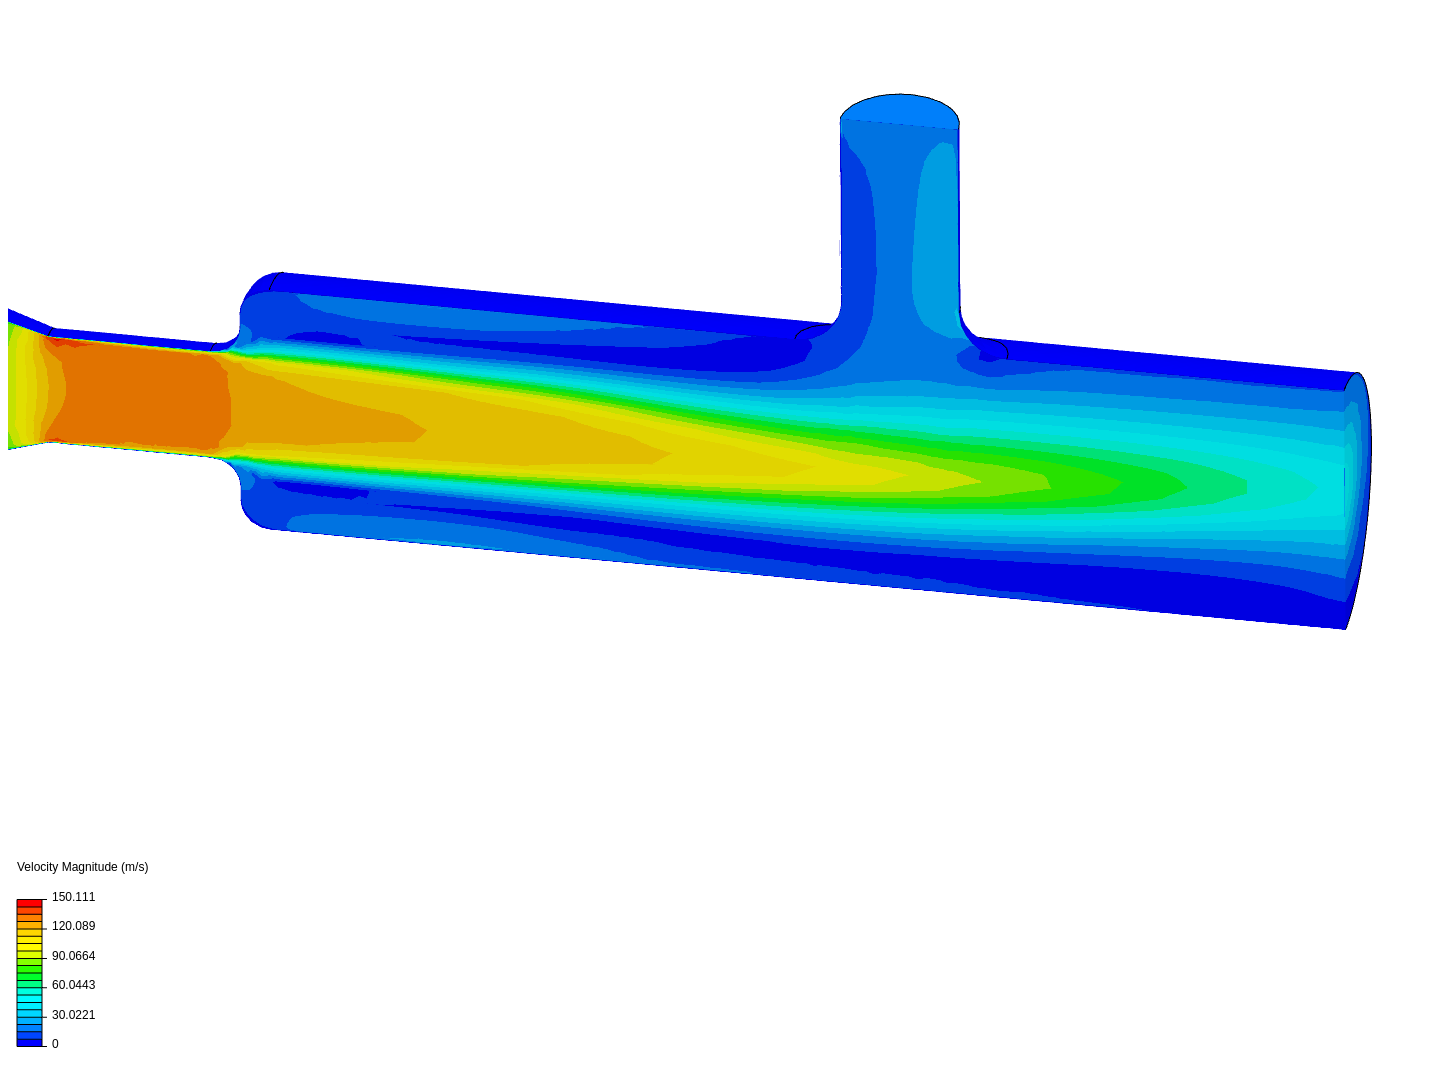 CFD nozzle image